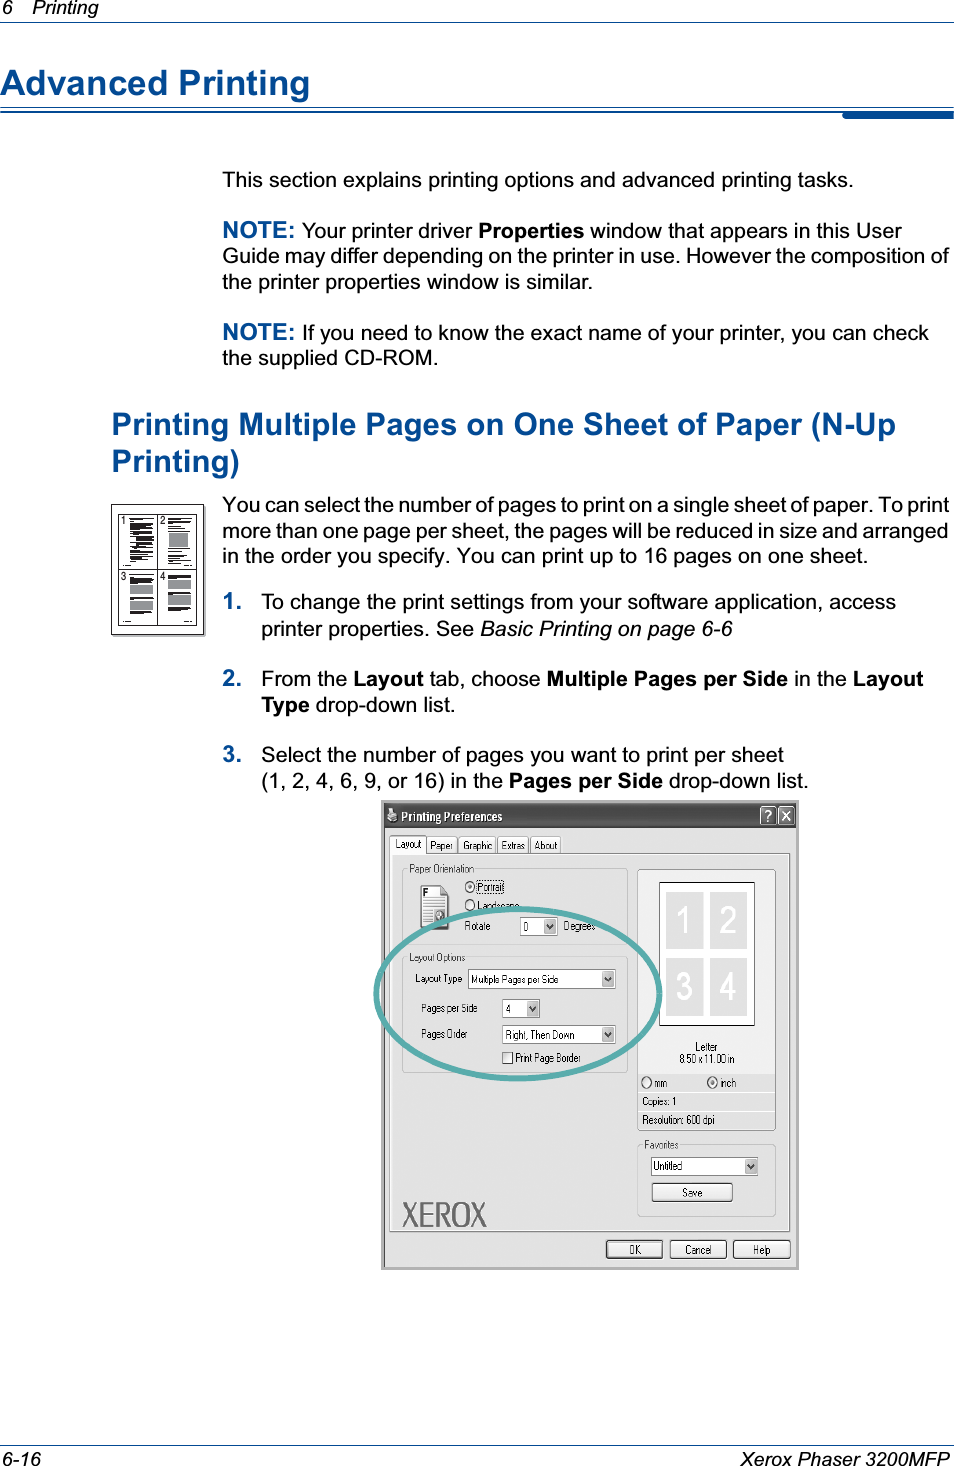 6Printing 6-16 Xerox Phaser 3200MFPAdvanced PrintingThis section explains printing options and advanced printing tasks. NOTE: Your printer driver Properties window that appears in this User Guide may differ depending on the printer in use. However the composition of the printer properties window is similar.NOTE: If you need to know the exact name of your printer, you can check the supplied CD-ROM.Printing Multiple Pages on One Sheet of Paper (N-Up Printing) You can select the number of pages to print on a single sheet of paper. To print more than one page per sheet, the pages will be reduced in size and arranged in the order you specify. You can print up to 16 pages on one sheet.  1. To change the print settings from your software application, access printer properties. See Basic Printing on page 6-62. From the Layout tab, choose Multiple Pages per Side in the Layout Type drop-down list. 3. Select the number of pages you want to print per sheet (1, 2, 4, 6, 9, or 16) in the Pages per Side drop-down list.1 23 4